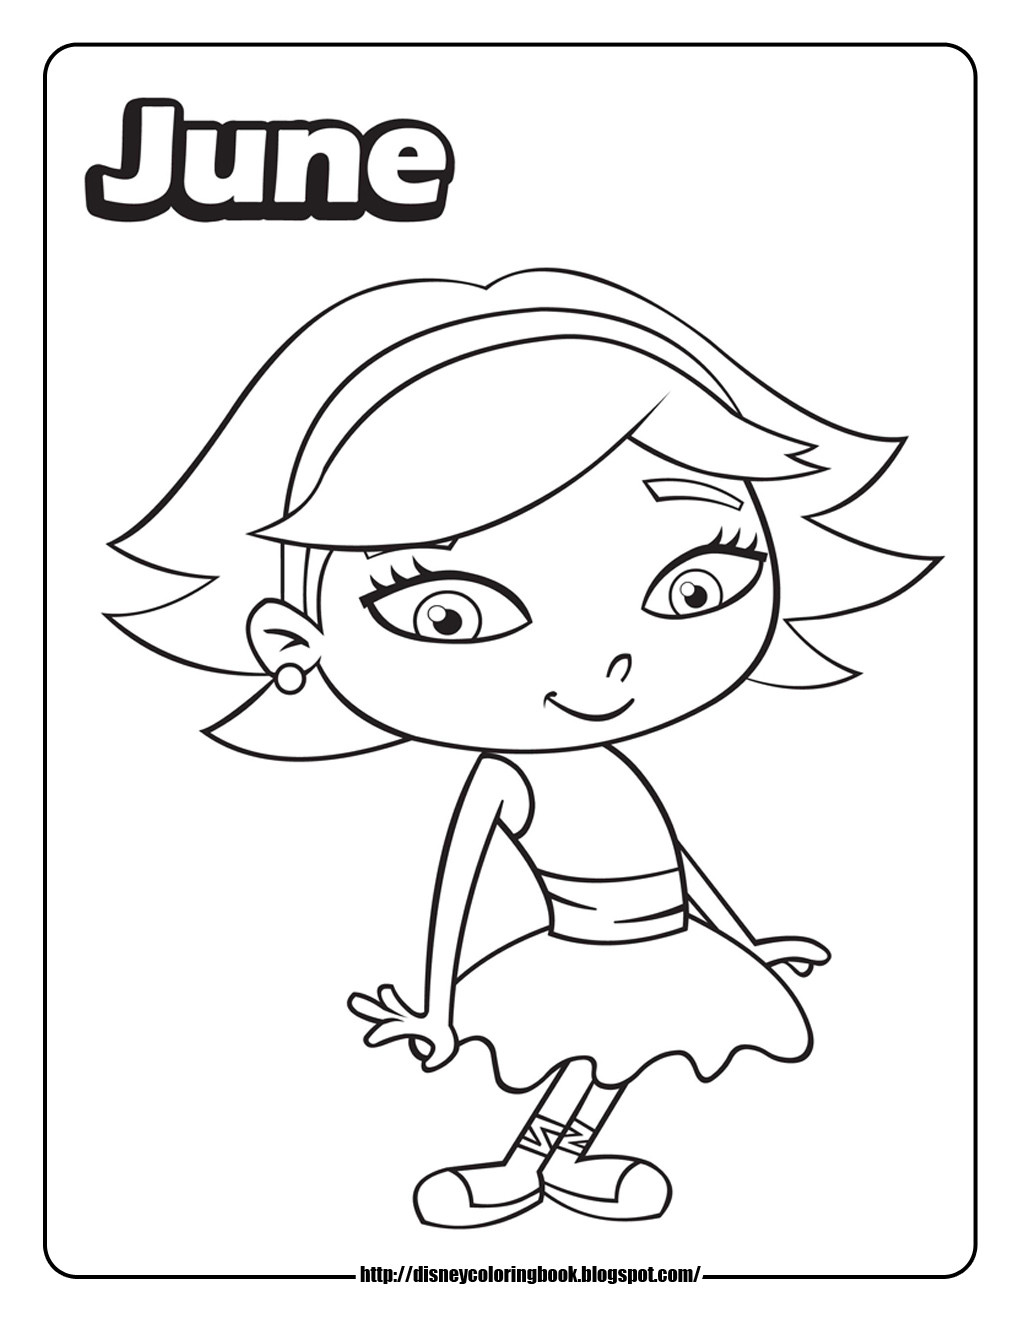 June Coloring Pages
 Little Einsteins 3 Free Disney Coloring Sheets